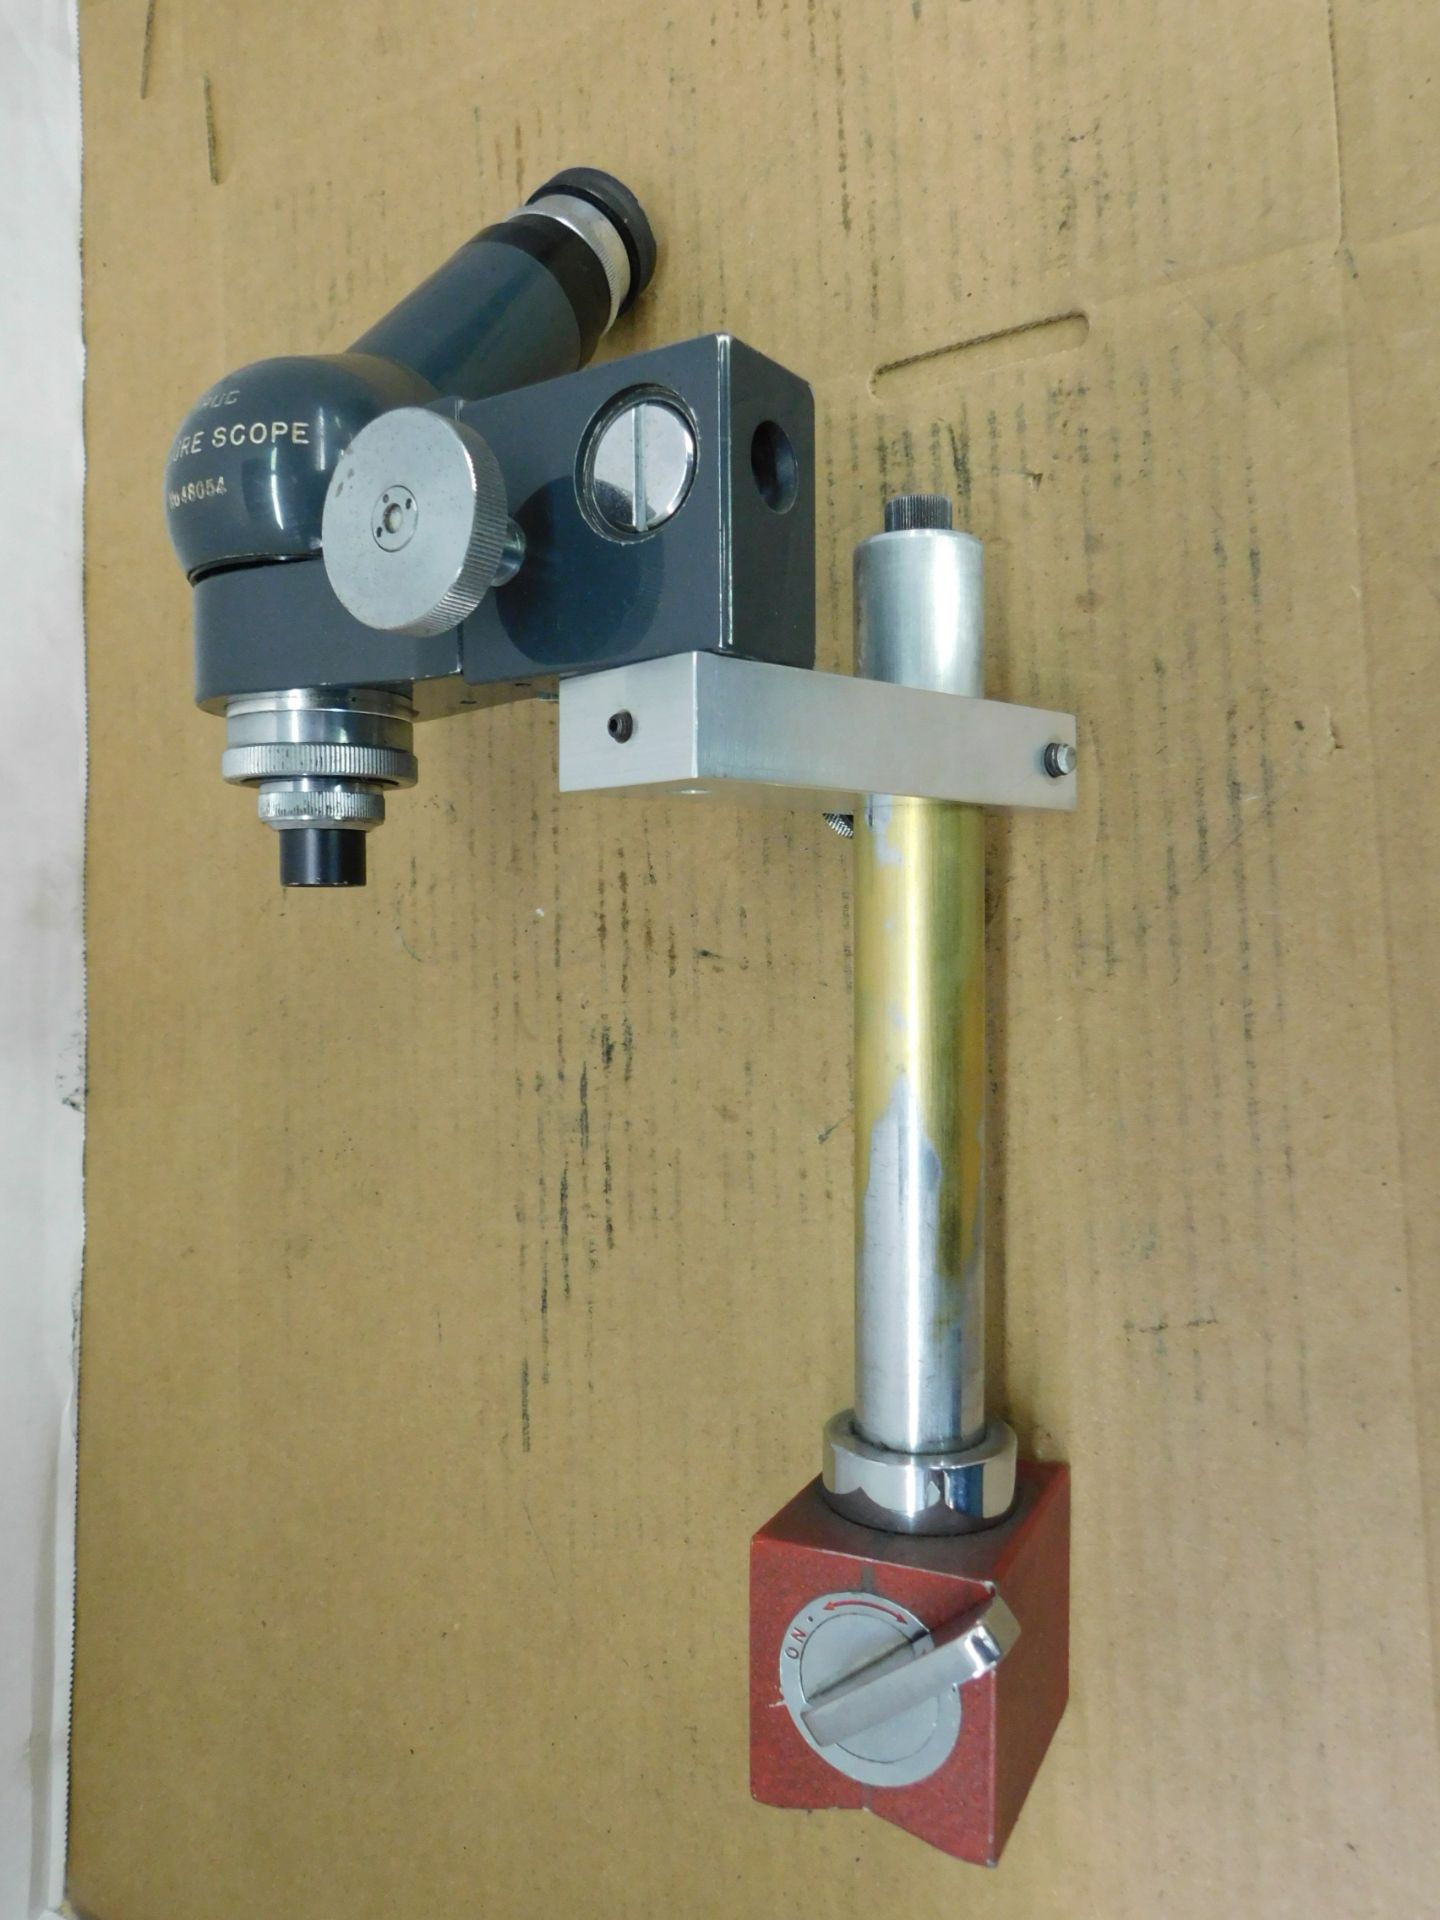 MIRUC Measure Scope, s/n 48054, with Magnetic Base